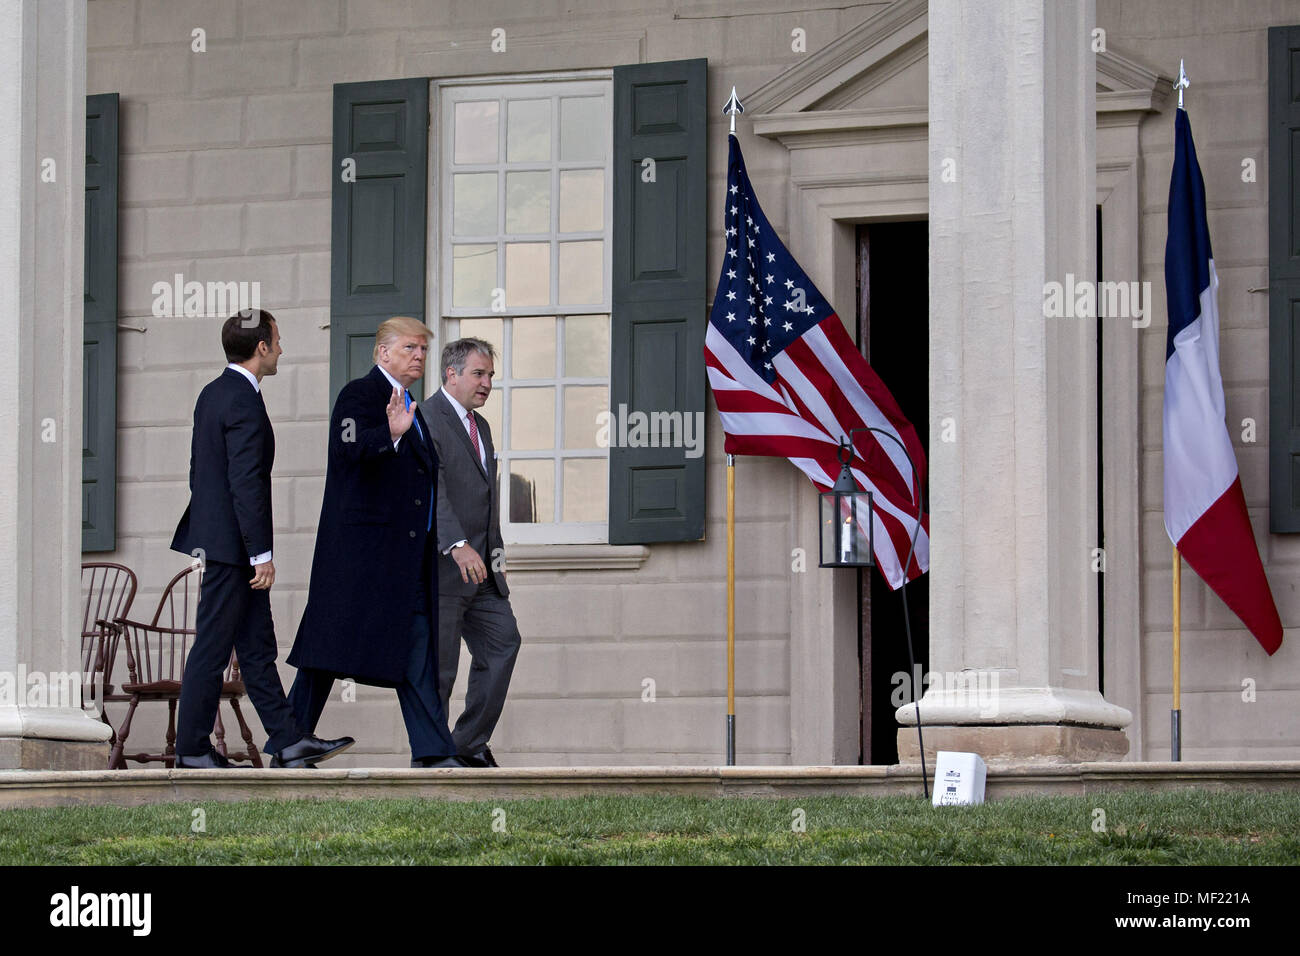 Mount Vernon, Virginia, USA. 23rd Apr, 2018. U.S. President Donald Trump, center, waves next to Emmanuel Macron, France's president, left, and Doug Bradburn, president and chief executive officer of George Washington's Mount Vernon, while touring outside the Mansion at the Mount Vernon estate of first U.S. President George Washington in Mount Vernon, Virginia, U.S., on Monday, April 23, 2018. As Macron arrives for the first state visit of Trump's presidency, the U.S. leader is threatening to upend the global trading system with tariffs on China, maybe Europe too. Credit Stock Photo